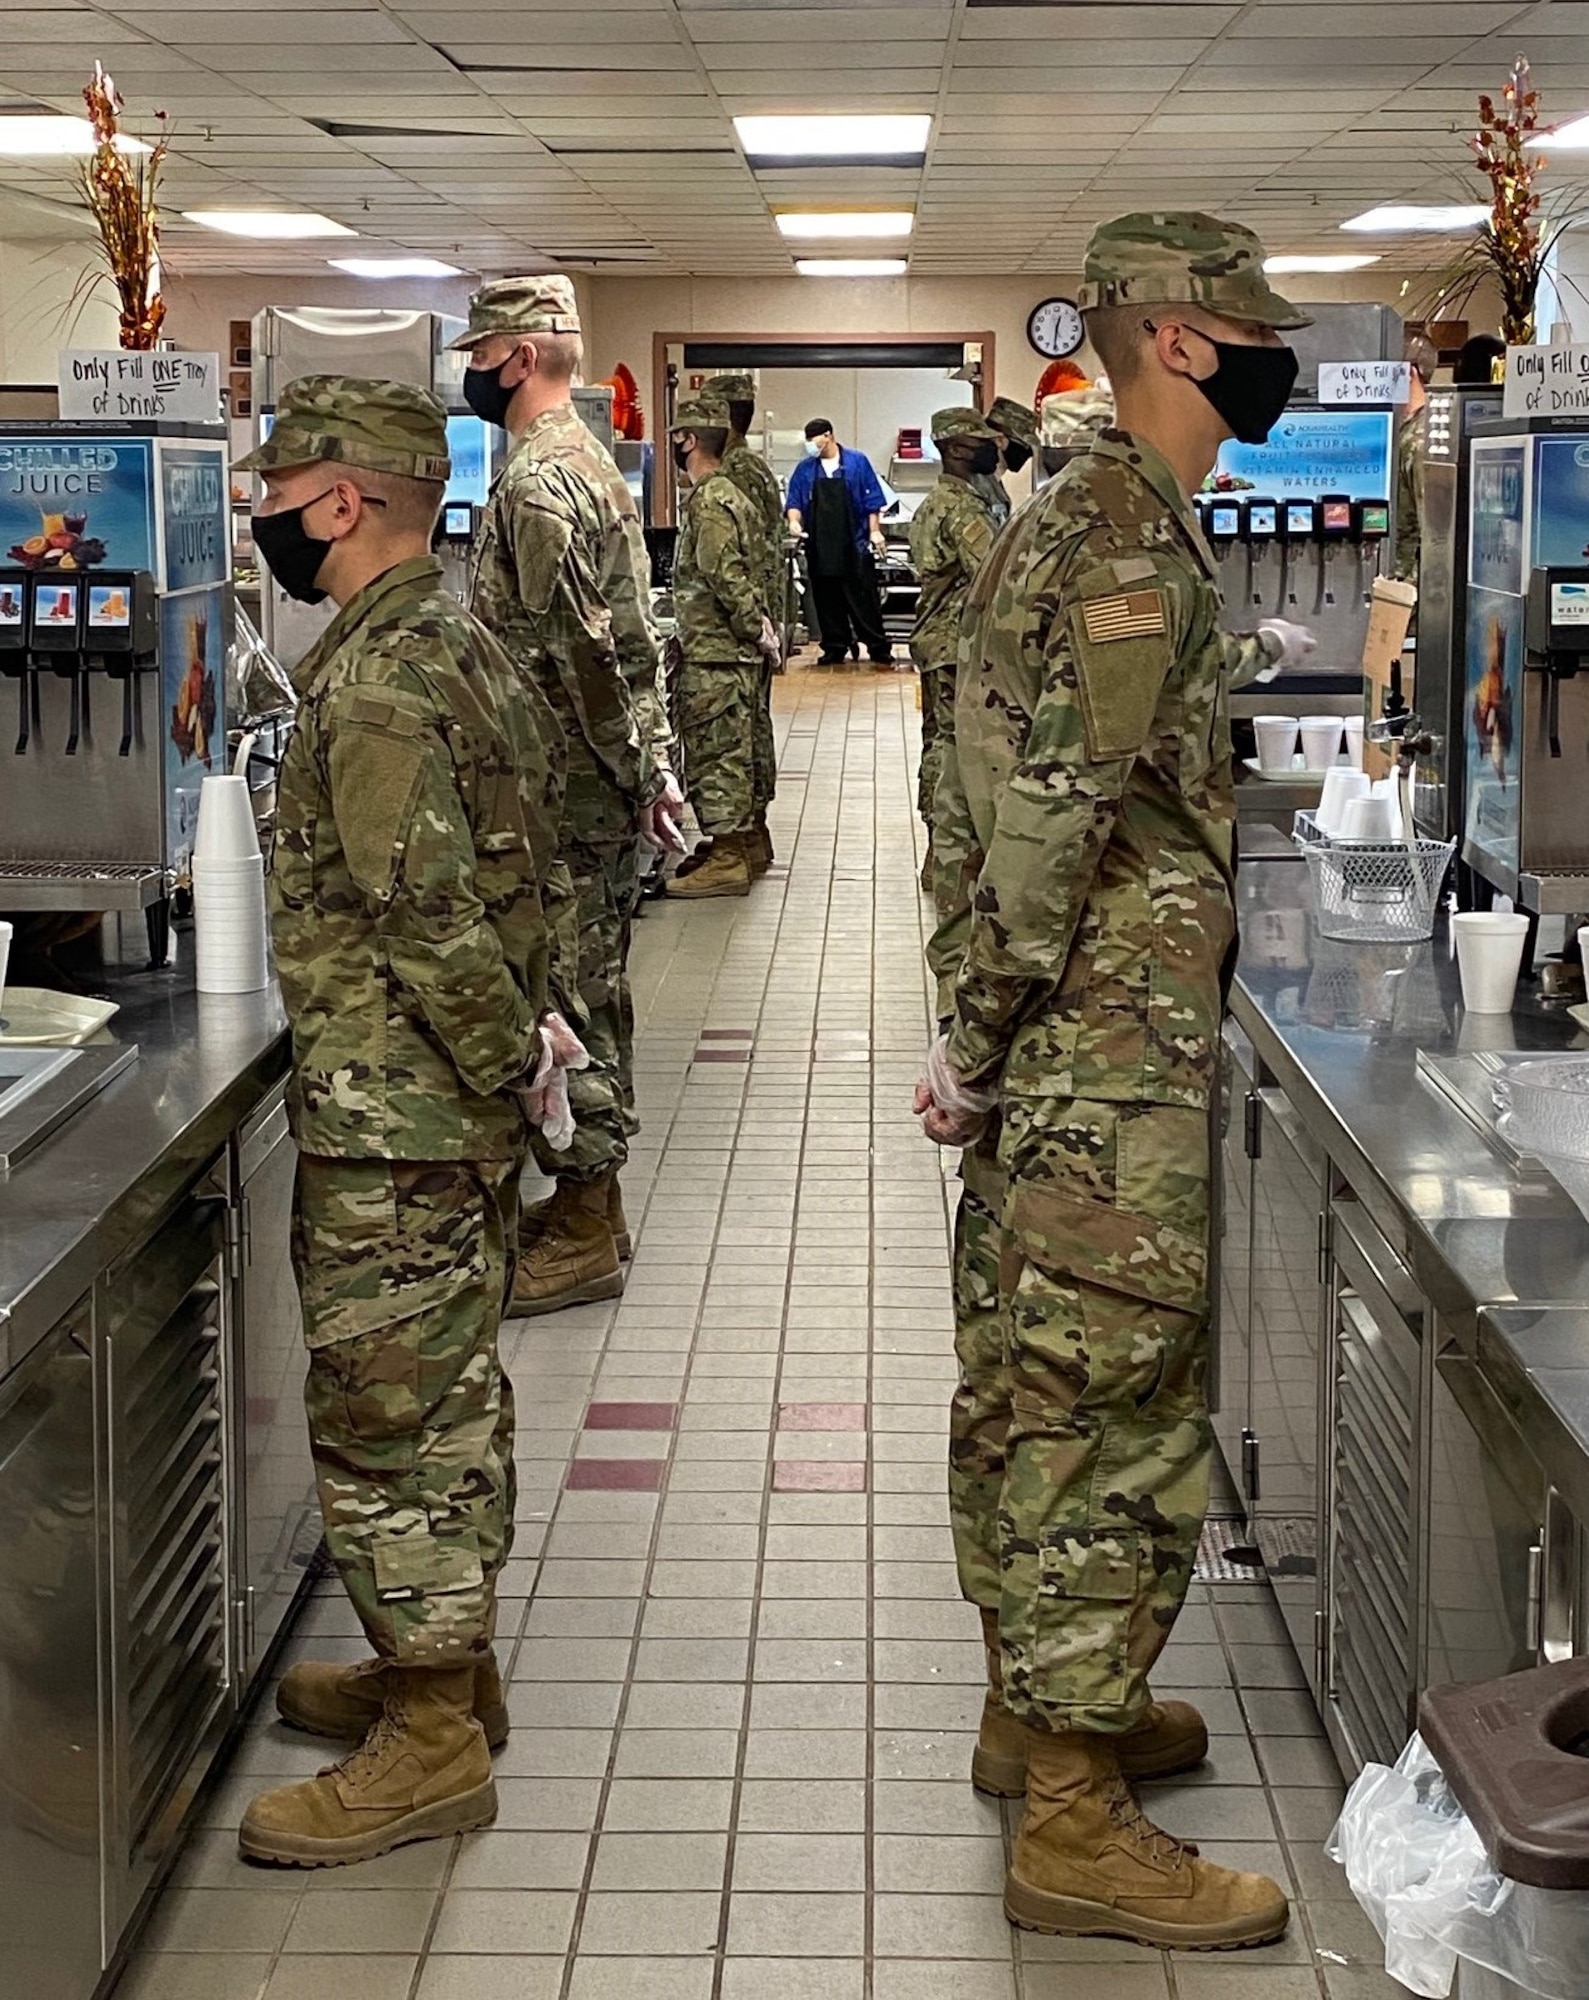 Airmen who graduated from Basic Military Training on Nov. 25 enjoy their Thanksgiving Day meal on Nov. 26 before shipping out to their respective technical training bases on Nov. 27.